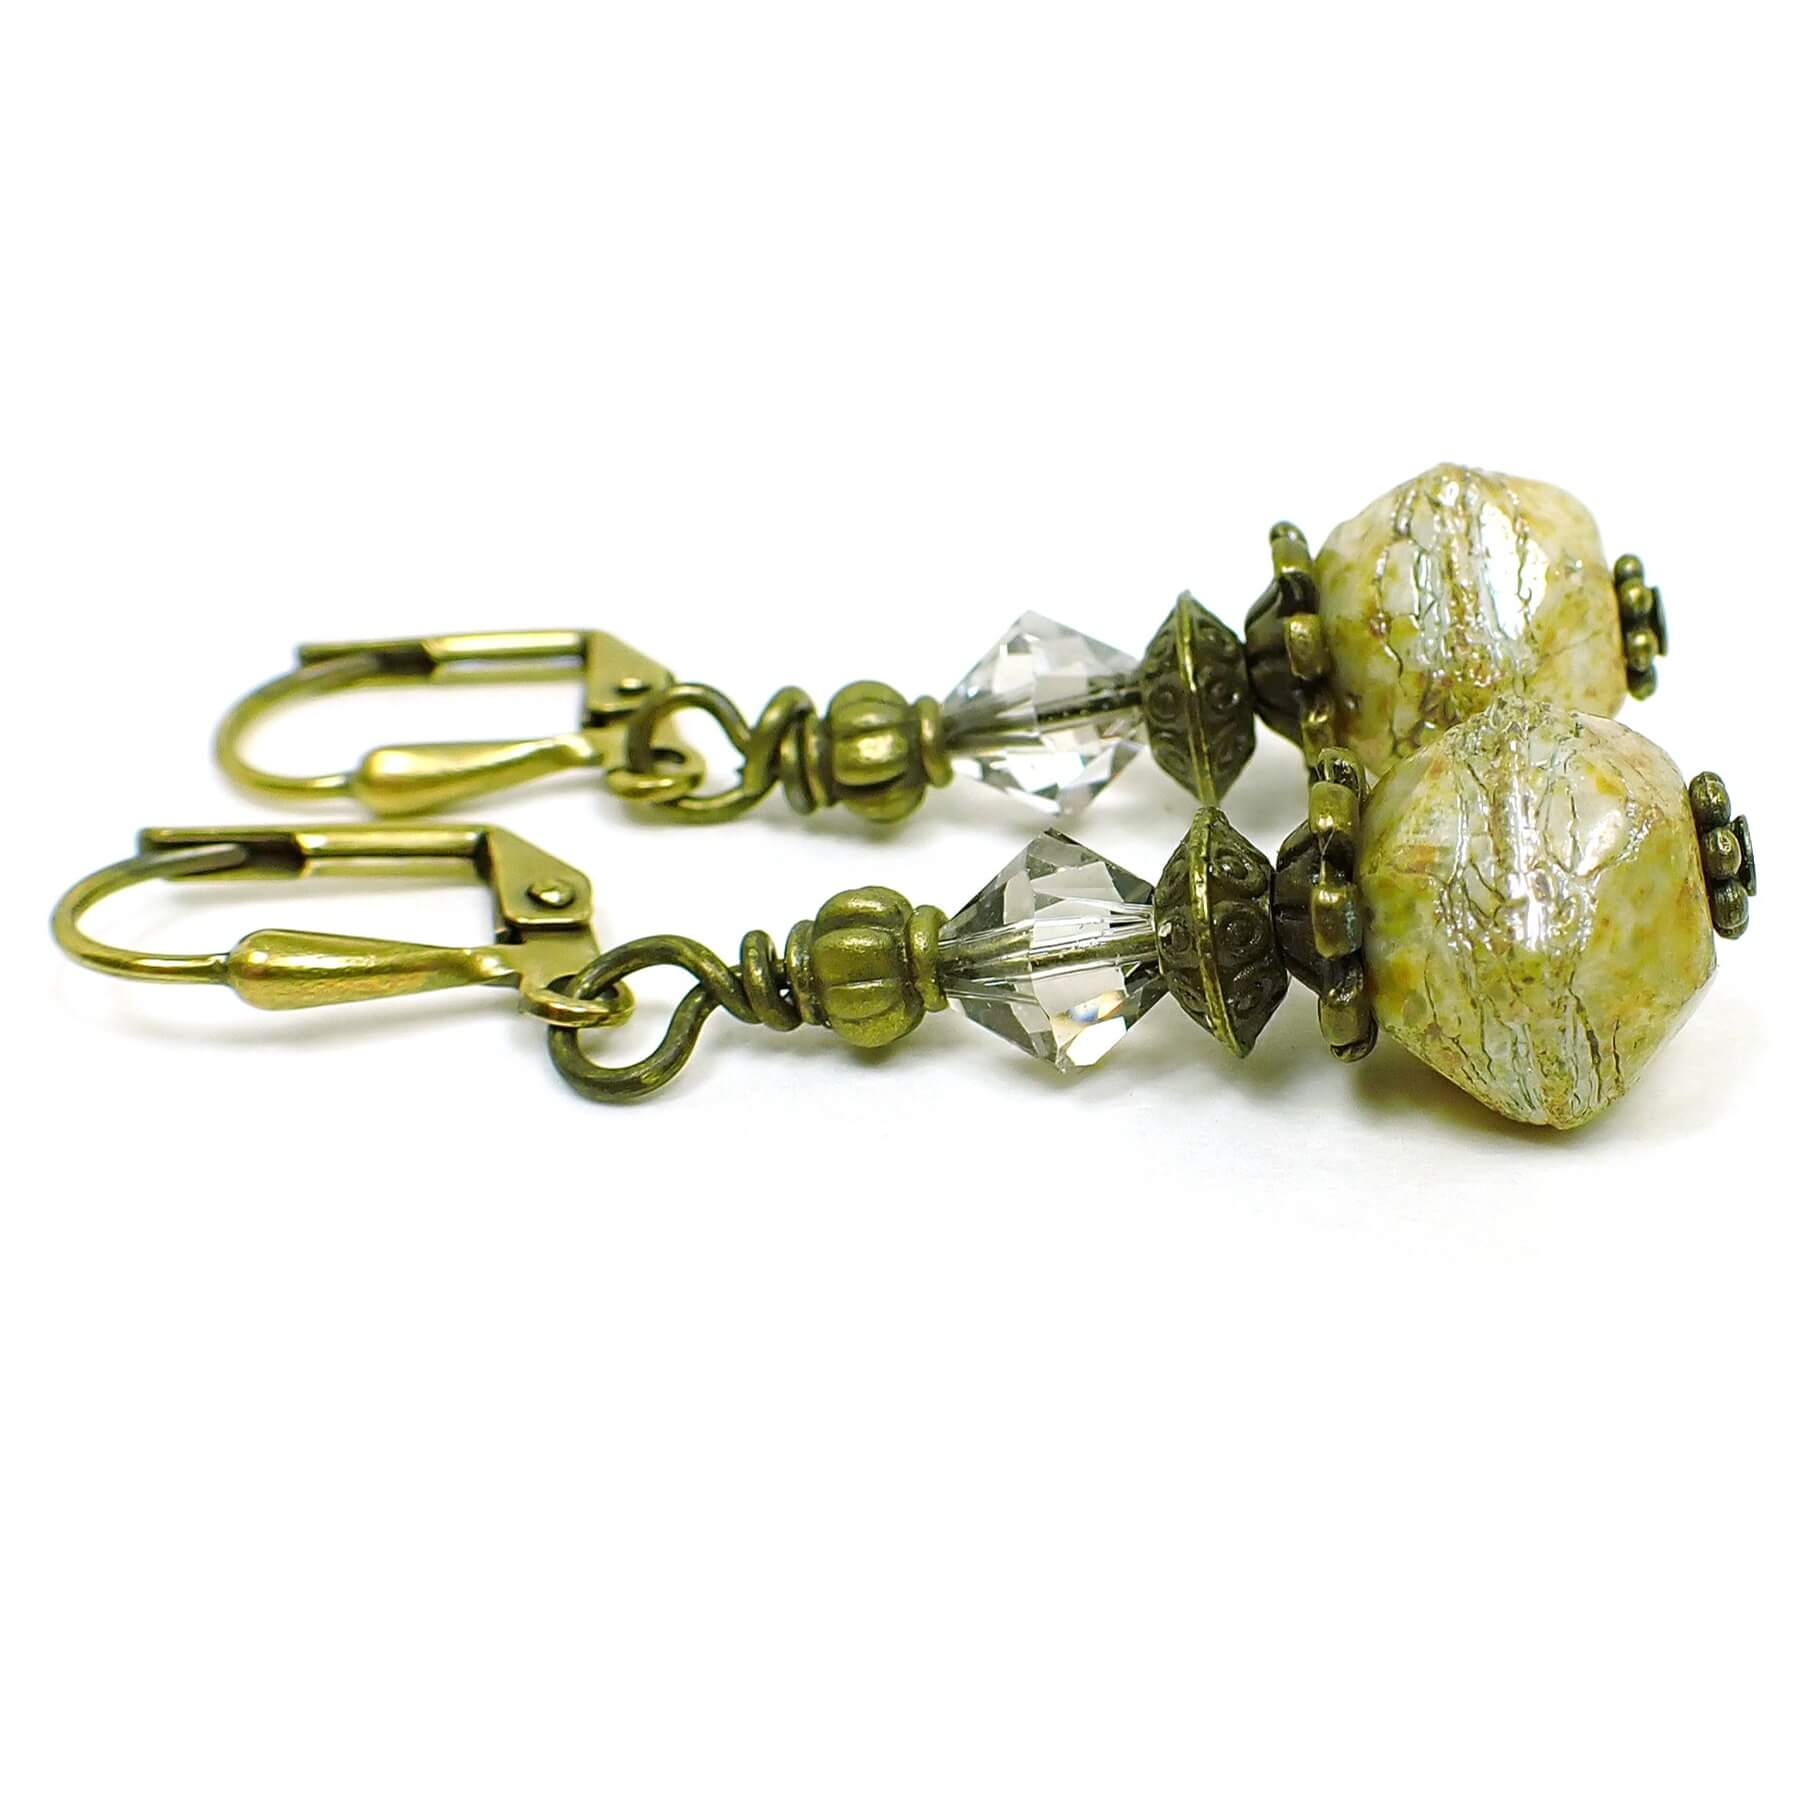 Side view of the multi color Czech glass beaded earrings. The metal is antiqued brass in color. There are very light smoky gray faceted glass crystal beads at the top. The bottom Czech glass beads are a faceted rondelle type shape with shades of yellow, green, and hints of brown in the recesses.